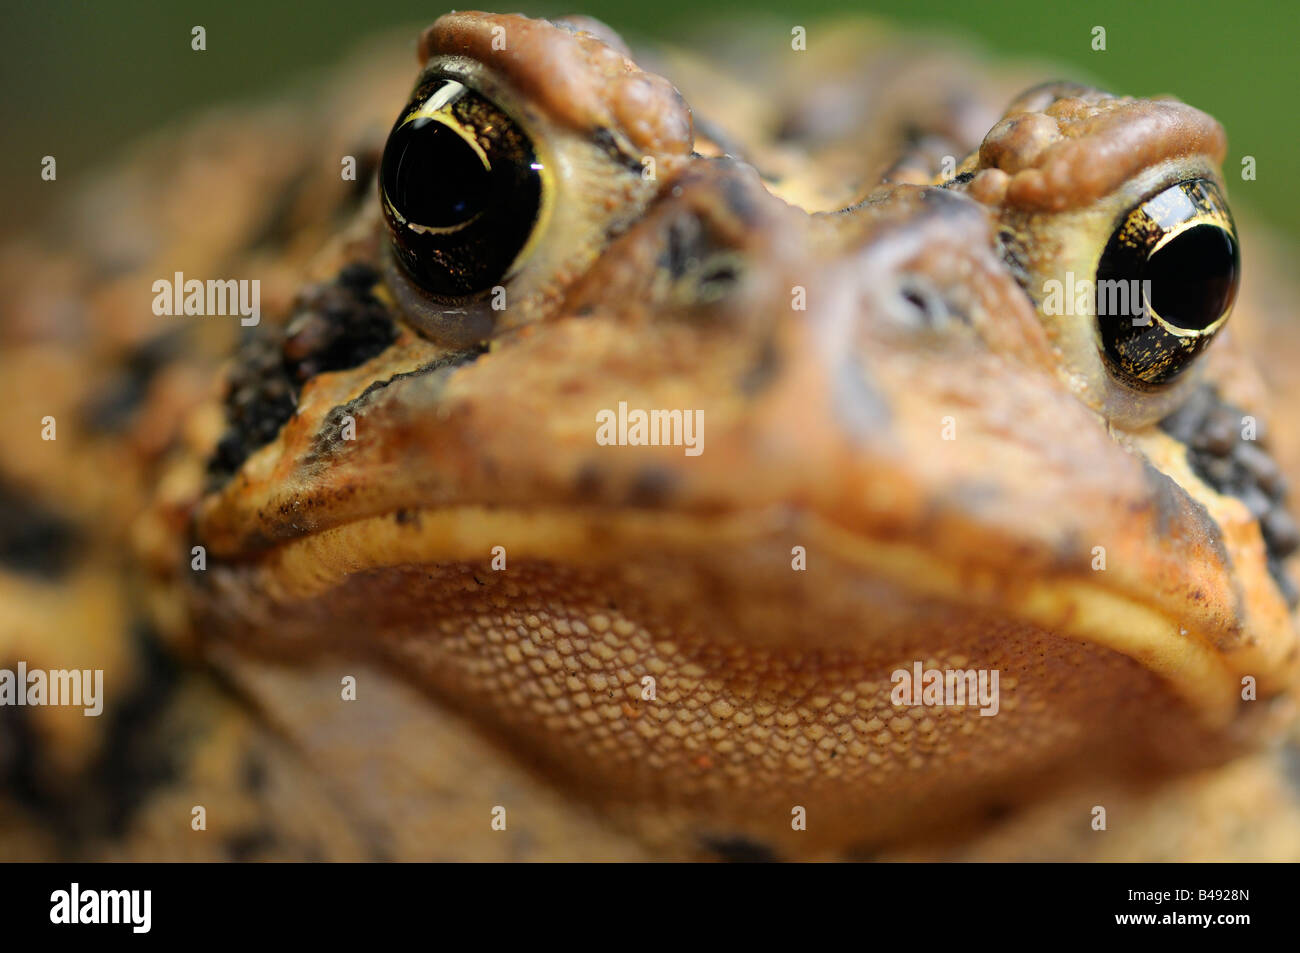 Close up front view of an ugly Eastern American Toad face Bufo Americanus with cranial crests and poison glands on wart skin Stock Photo